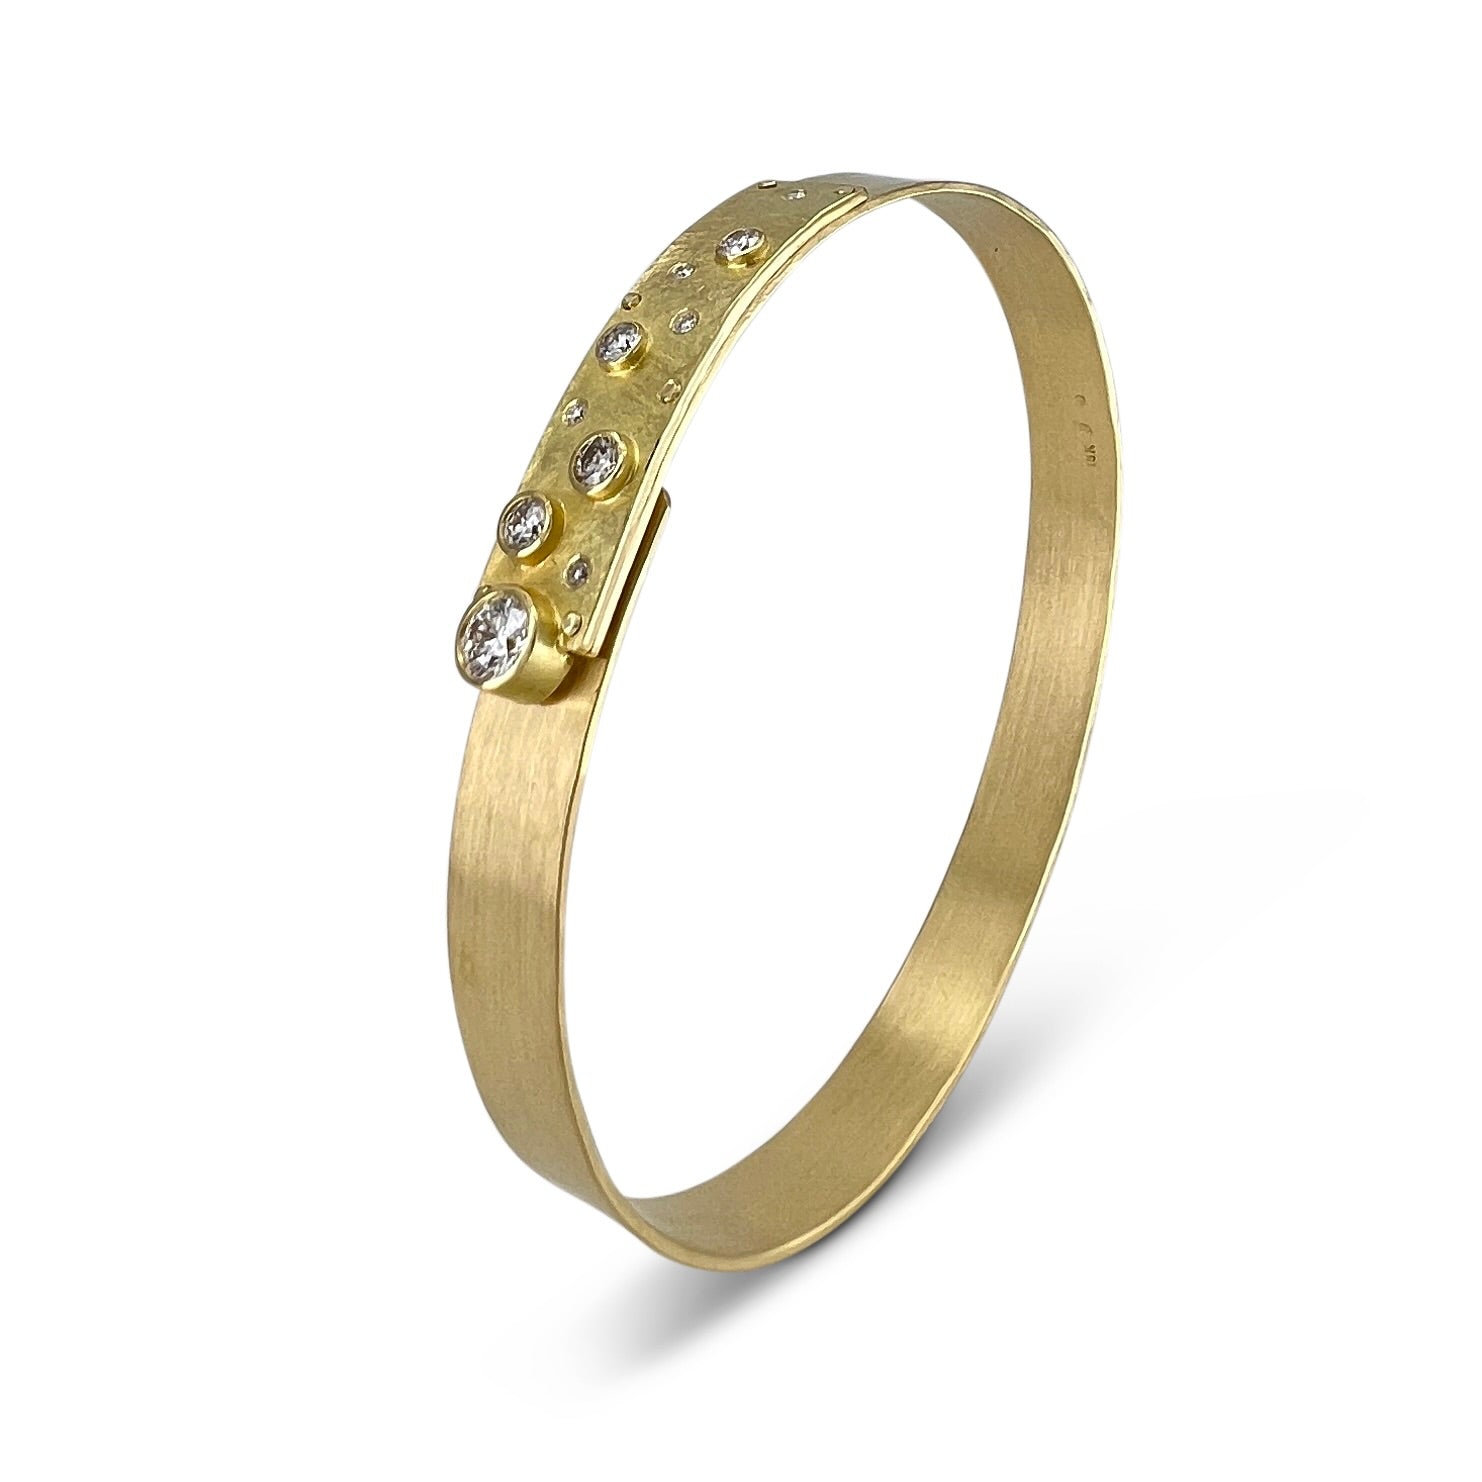 Narrow forged cuff in 18K yellow gold with diamonds